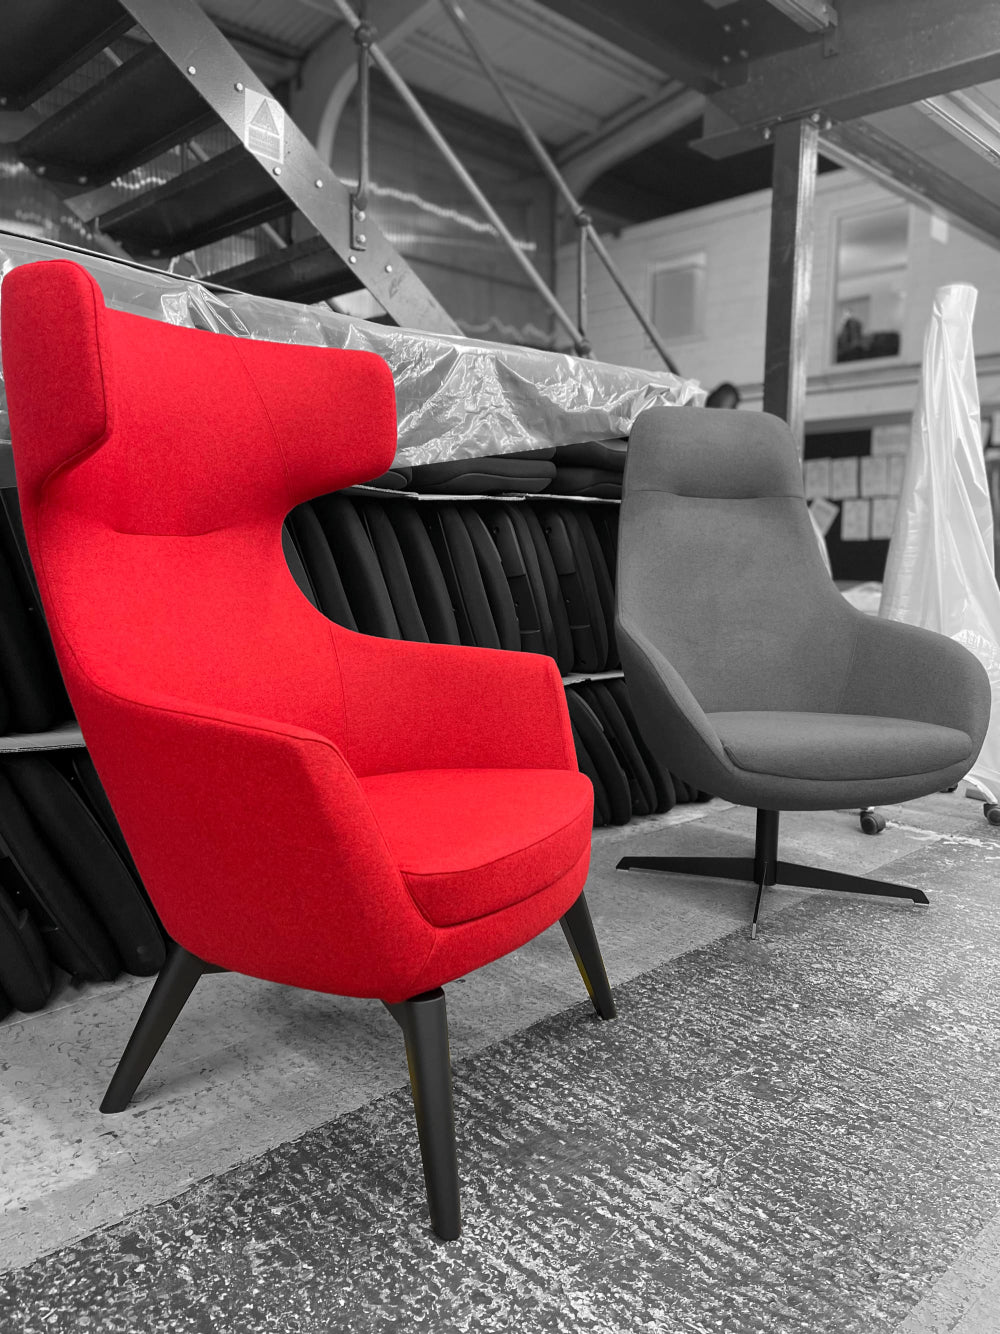 Ava Upholstered Lounge Chair with 4 Wooden Legs in Red Finish with Grey Lounge Chair